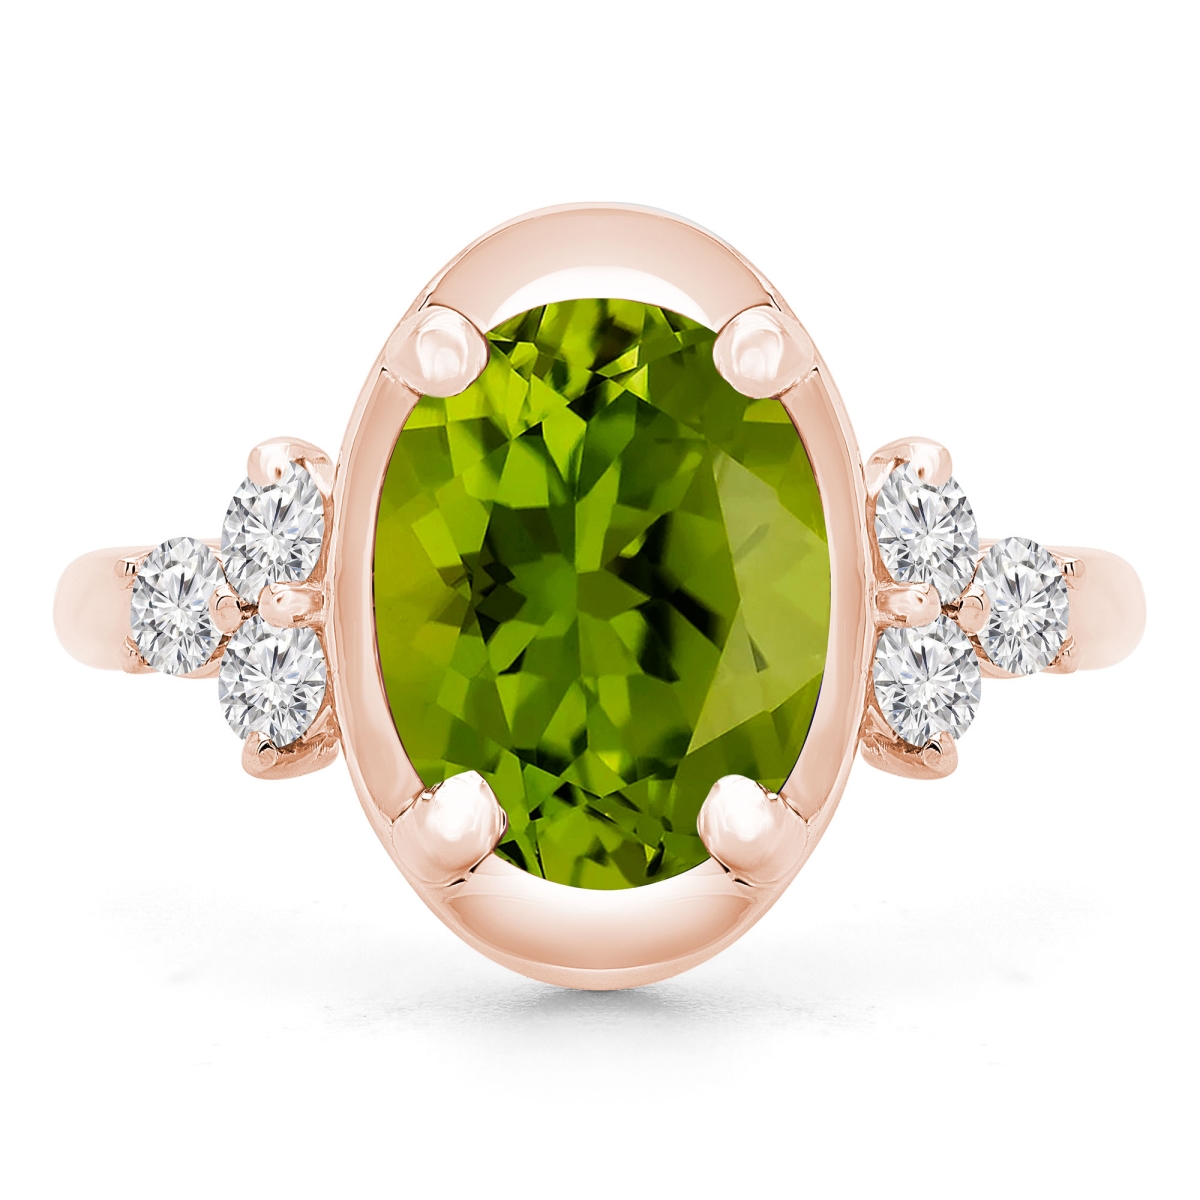 Picture of Majesty Diamonds MD190412-4.75 3.9 CTW Oval Green Peridot Cocktail Ring in 14K Rose Gold - Size 4.75